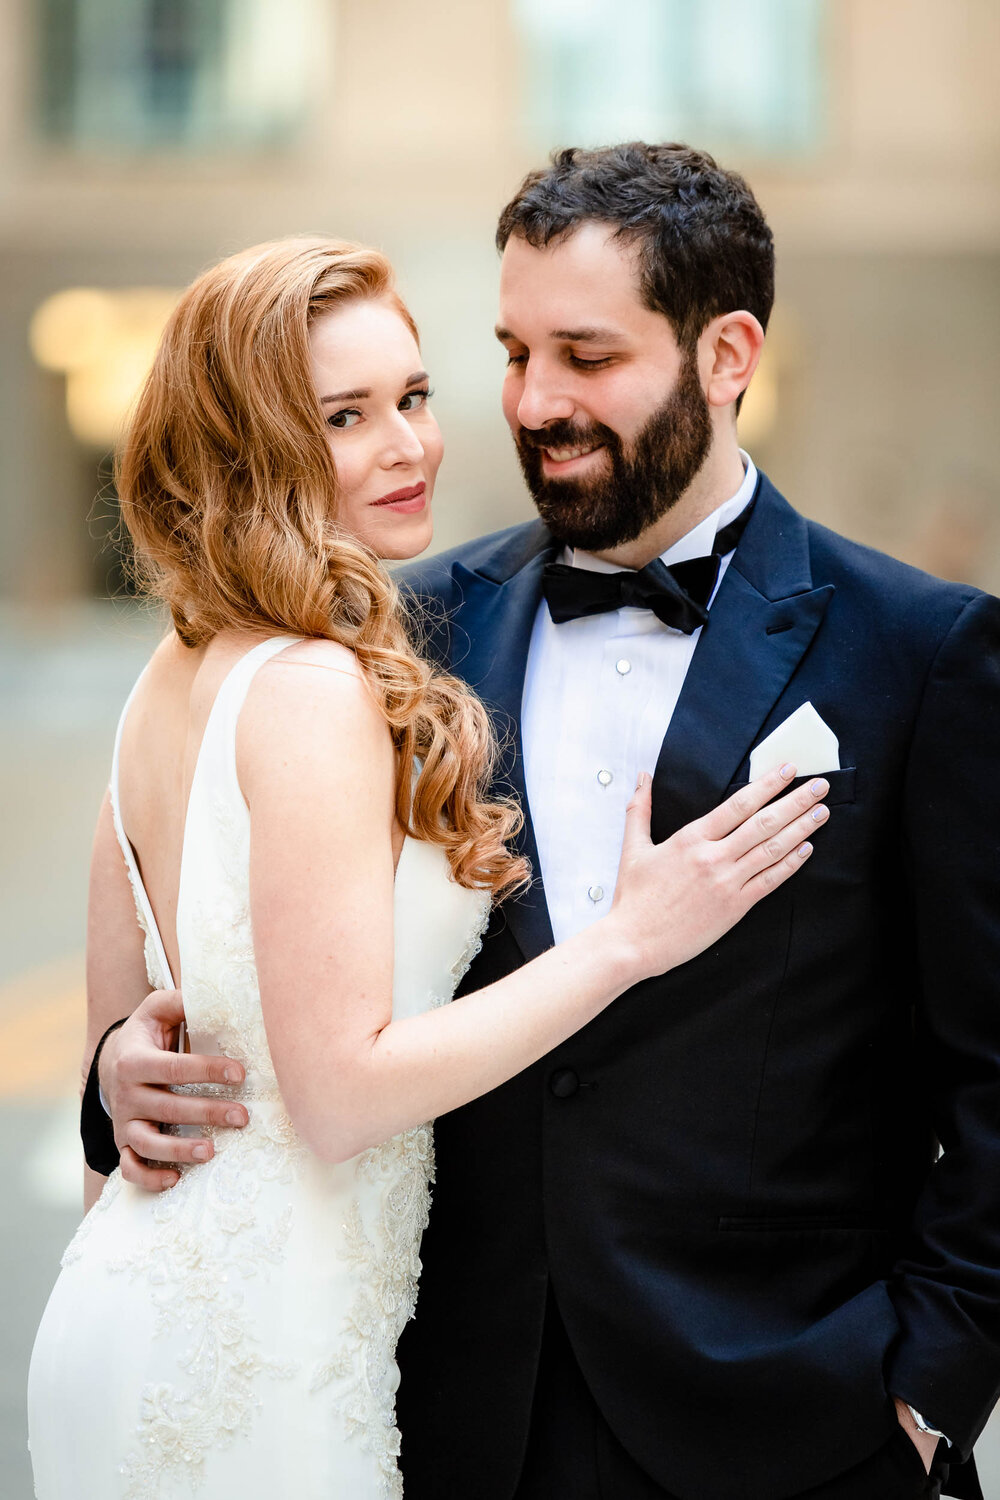 Beautiful portrait of the bride and groom:  Chicago wedding photographs by J. Brown Photography.